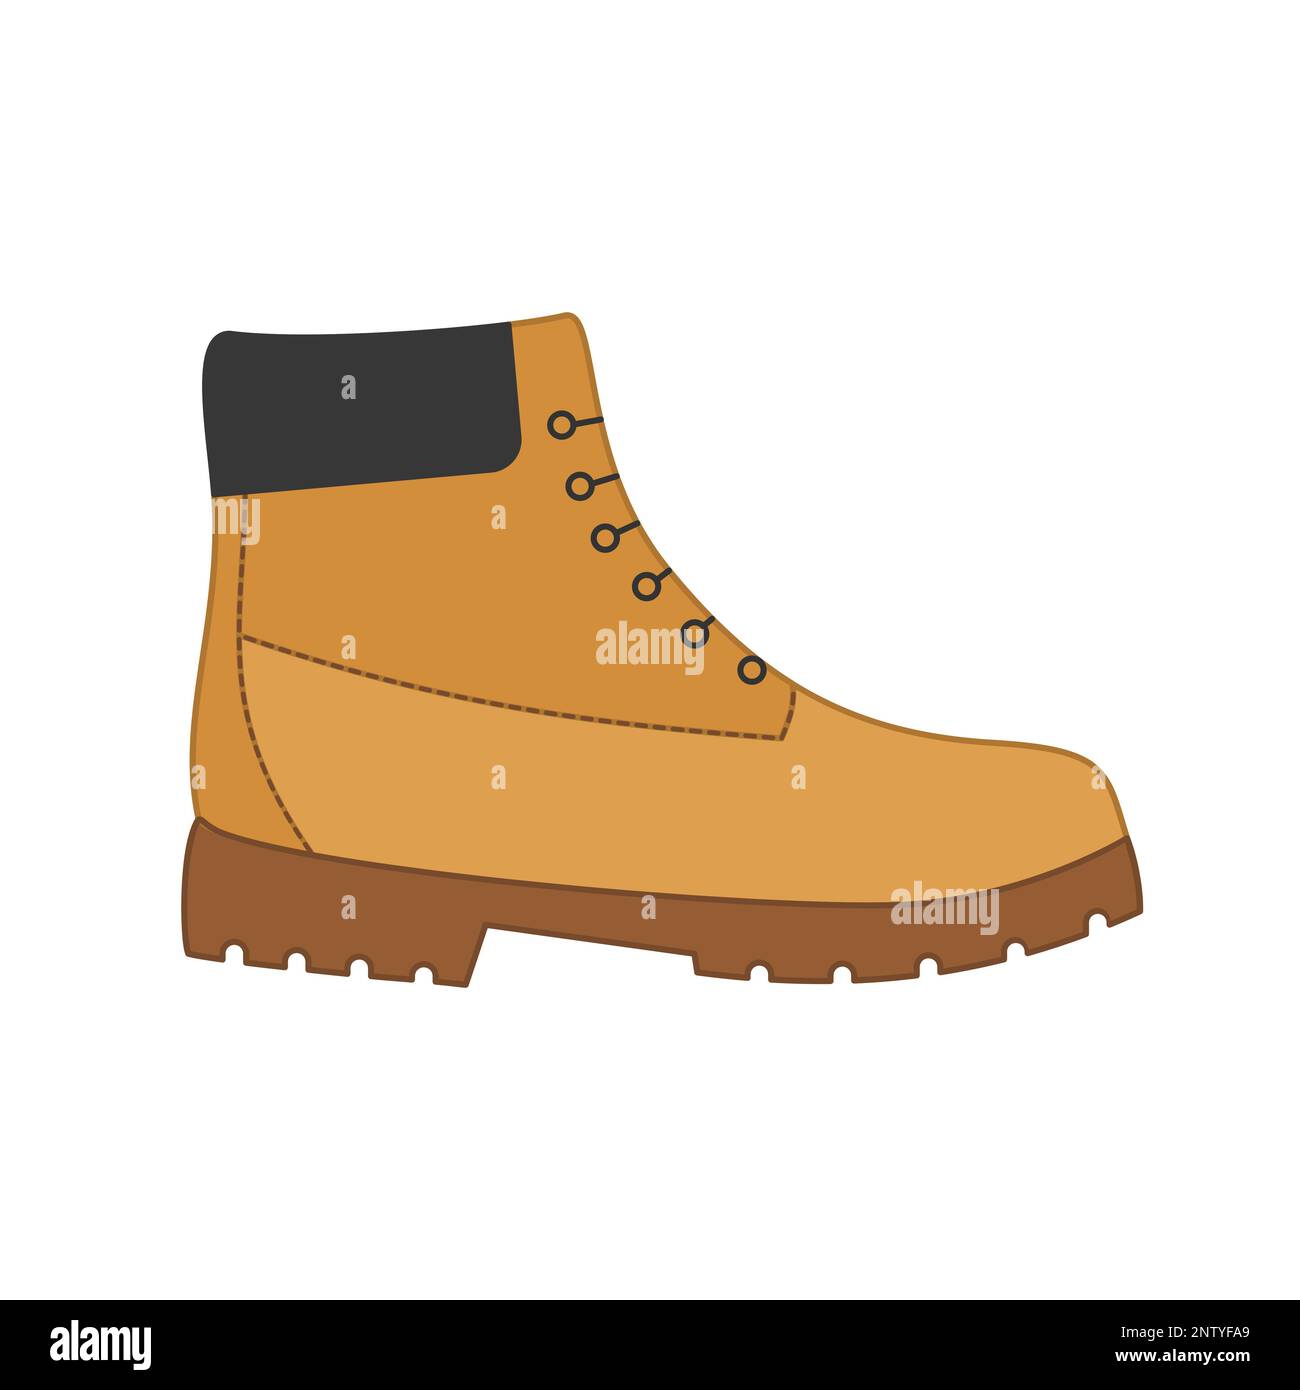 Construction worker boot. Yellow safety working shoe. Hiking lifestyle boot. Personal protection equipment footwear. Health safety environment. Vector Stock Vector